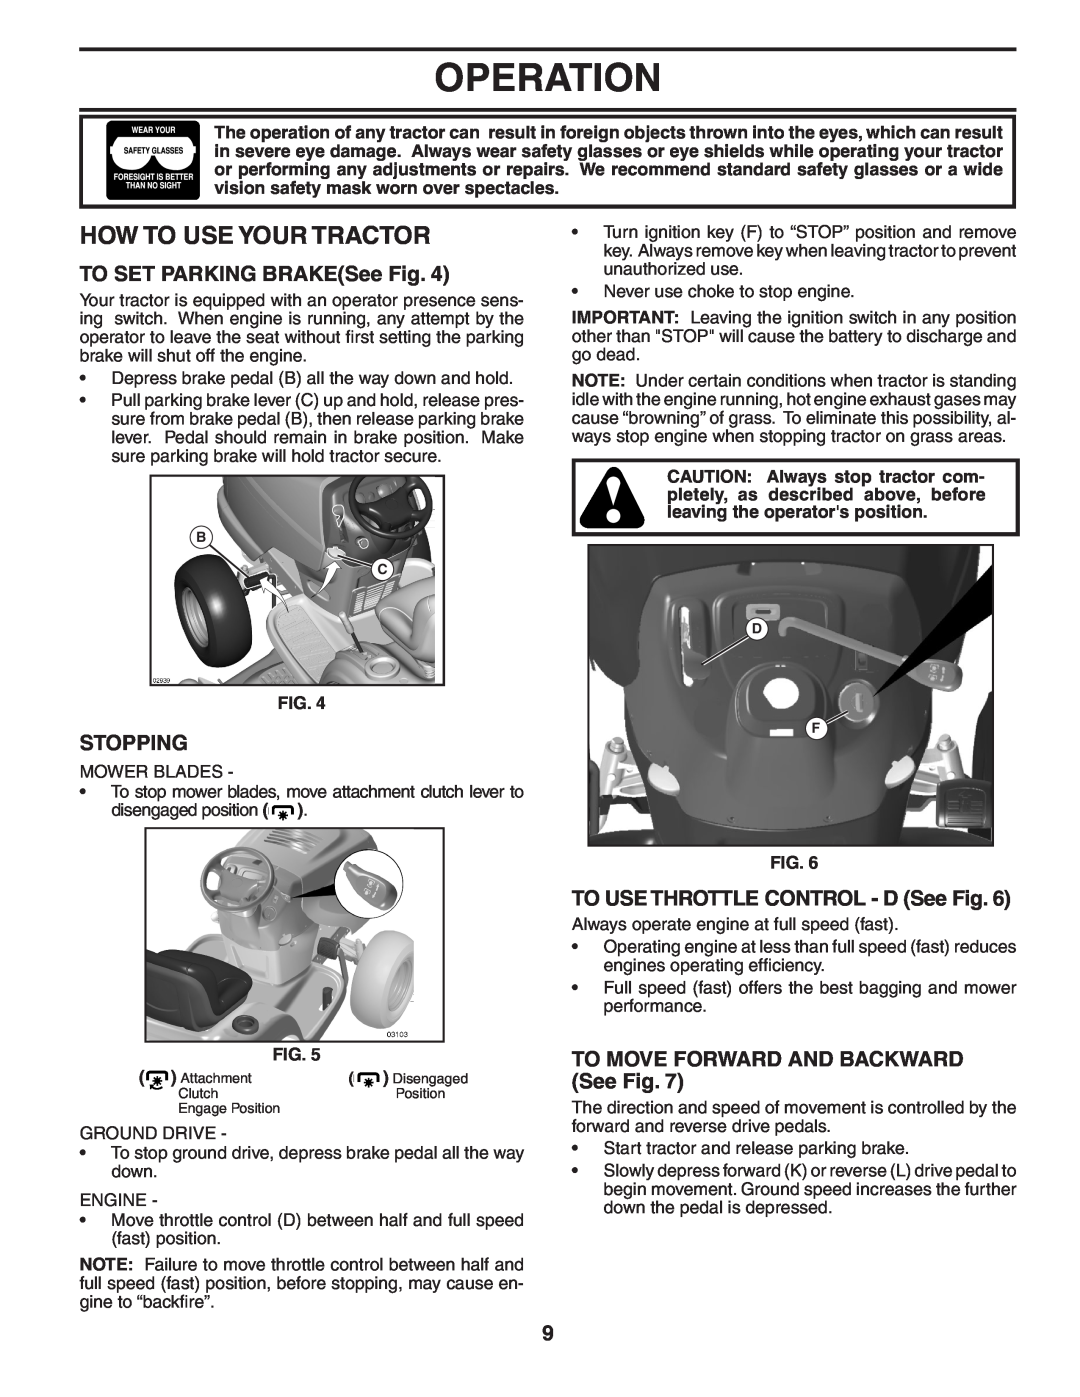 Poulan 403808 manual How To Use Your Tractor, TO SET PARKING BRAKESee Fig, Stopping, TO USE THROTTLE CONTROL - D See Fig 